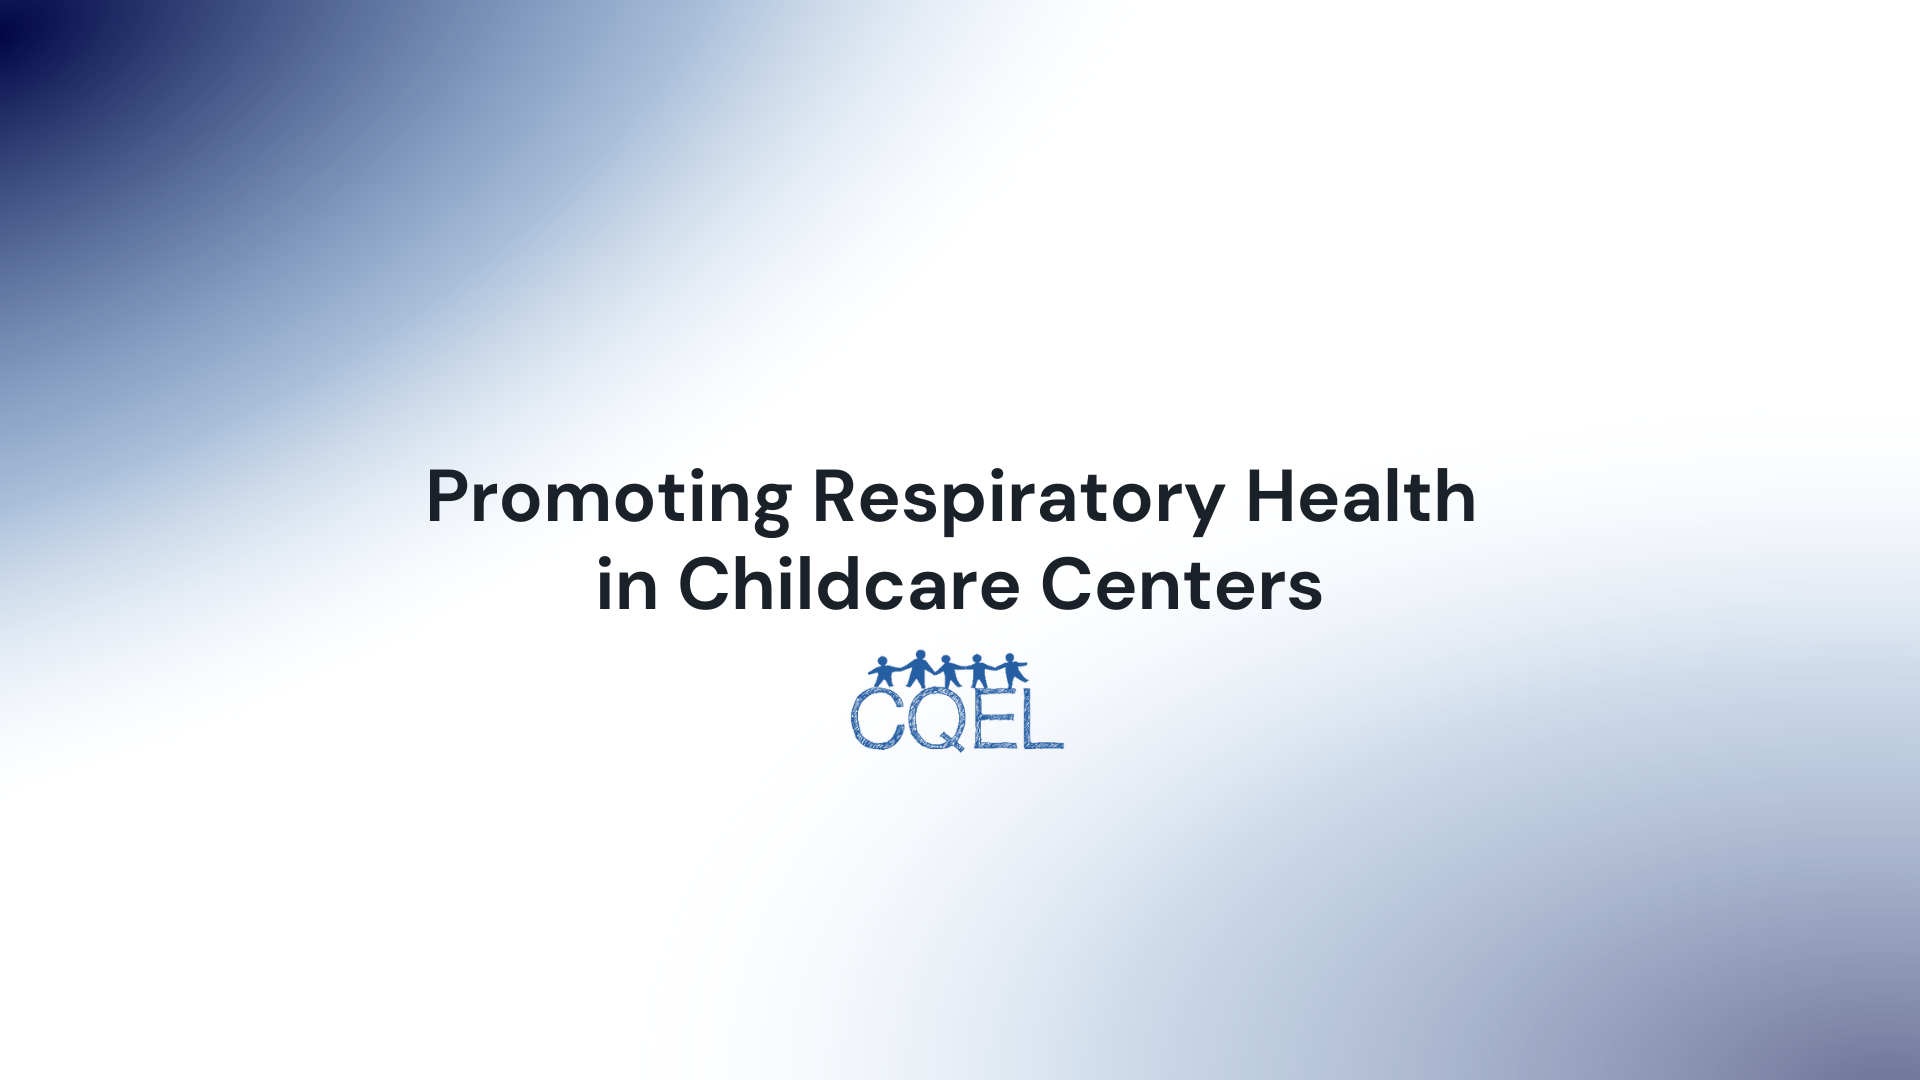 Promoting Respiratory Health in Childcare Centers